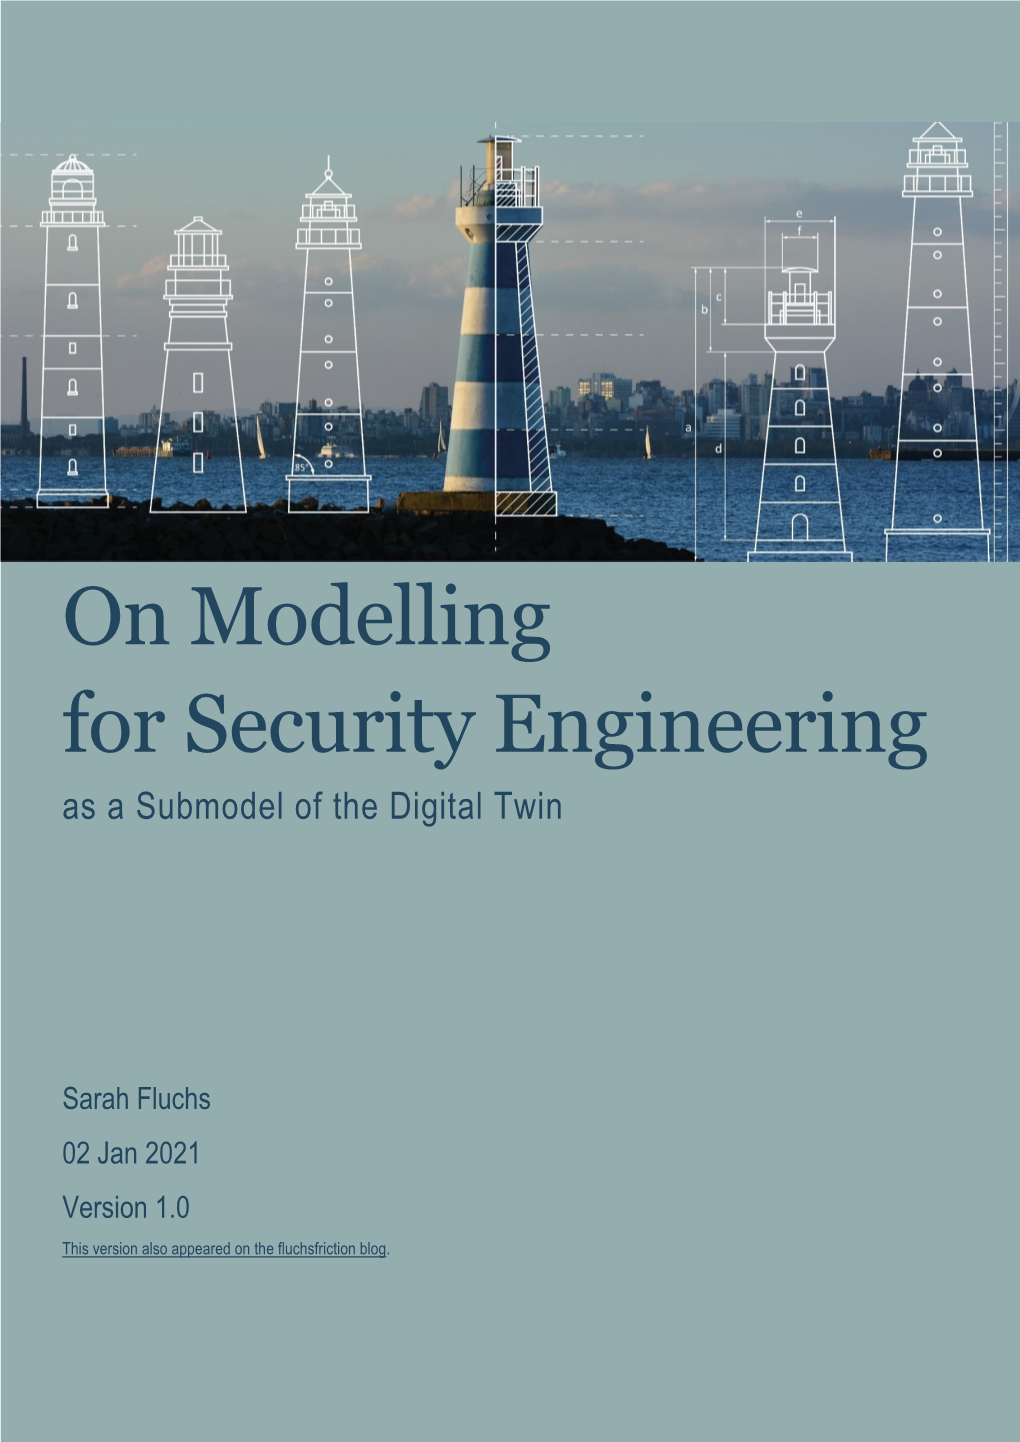 On Modelling for Security Engineering As a Submodel of the Digital Twin